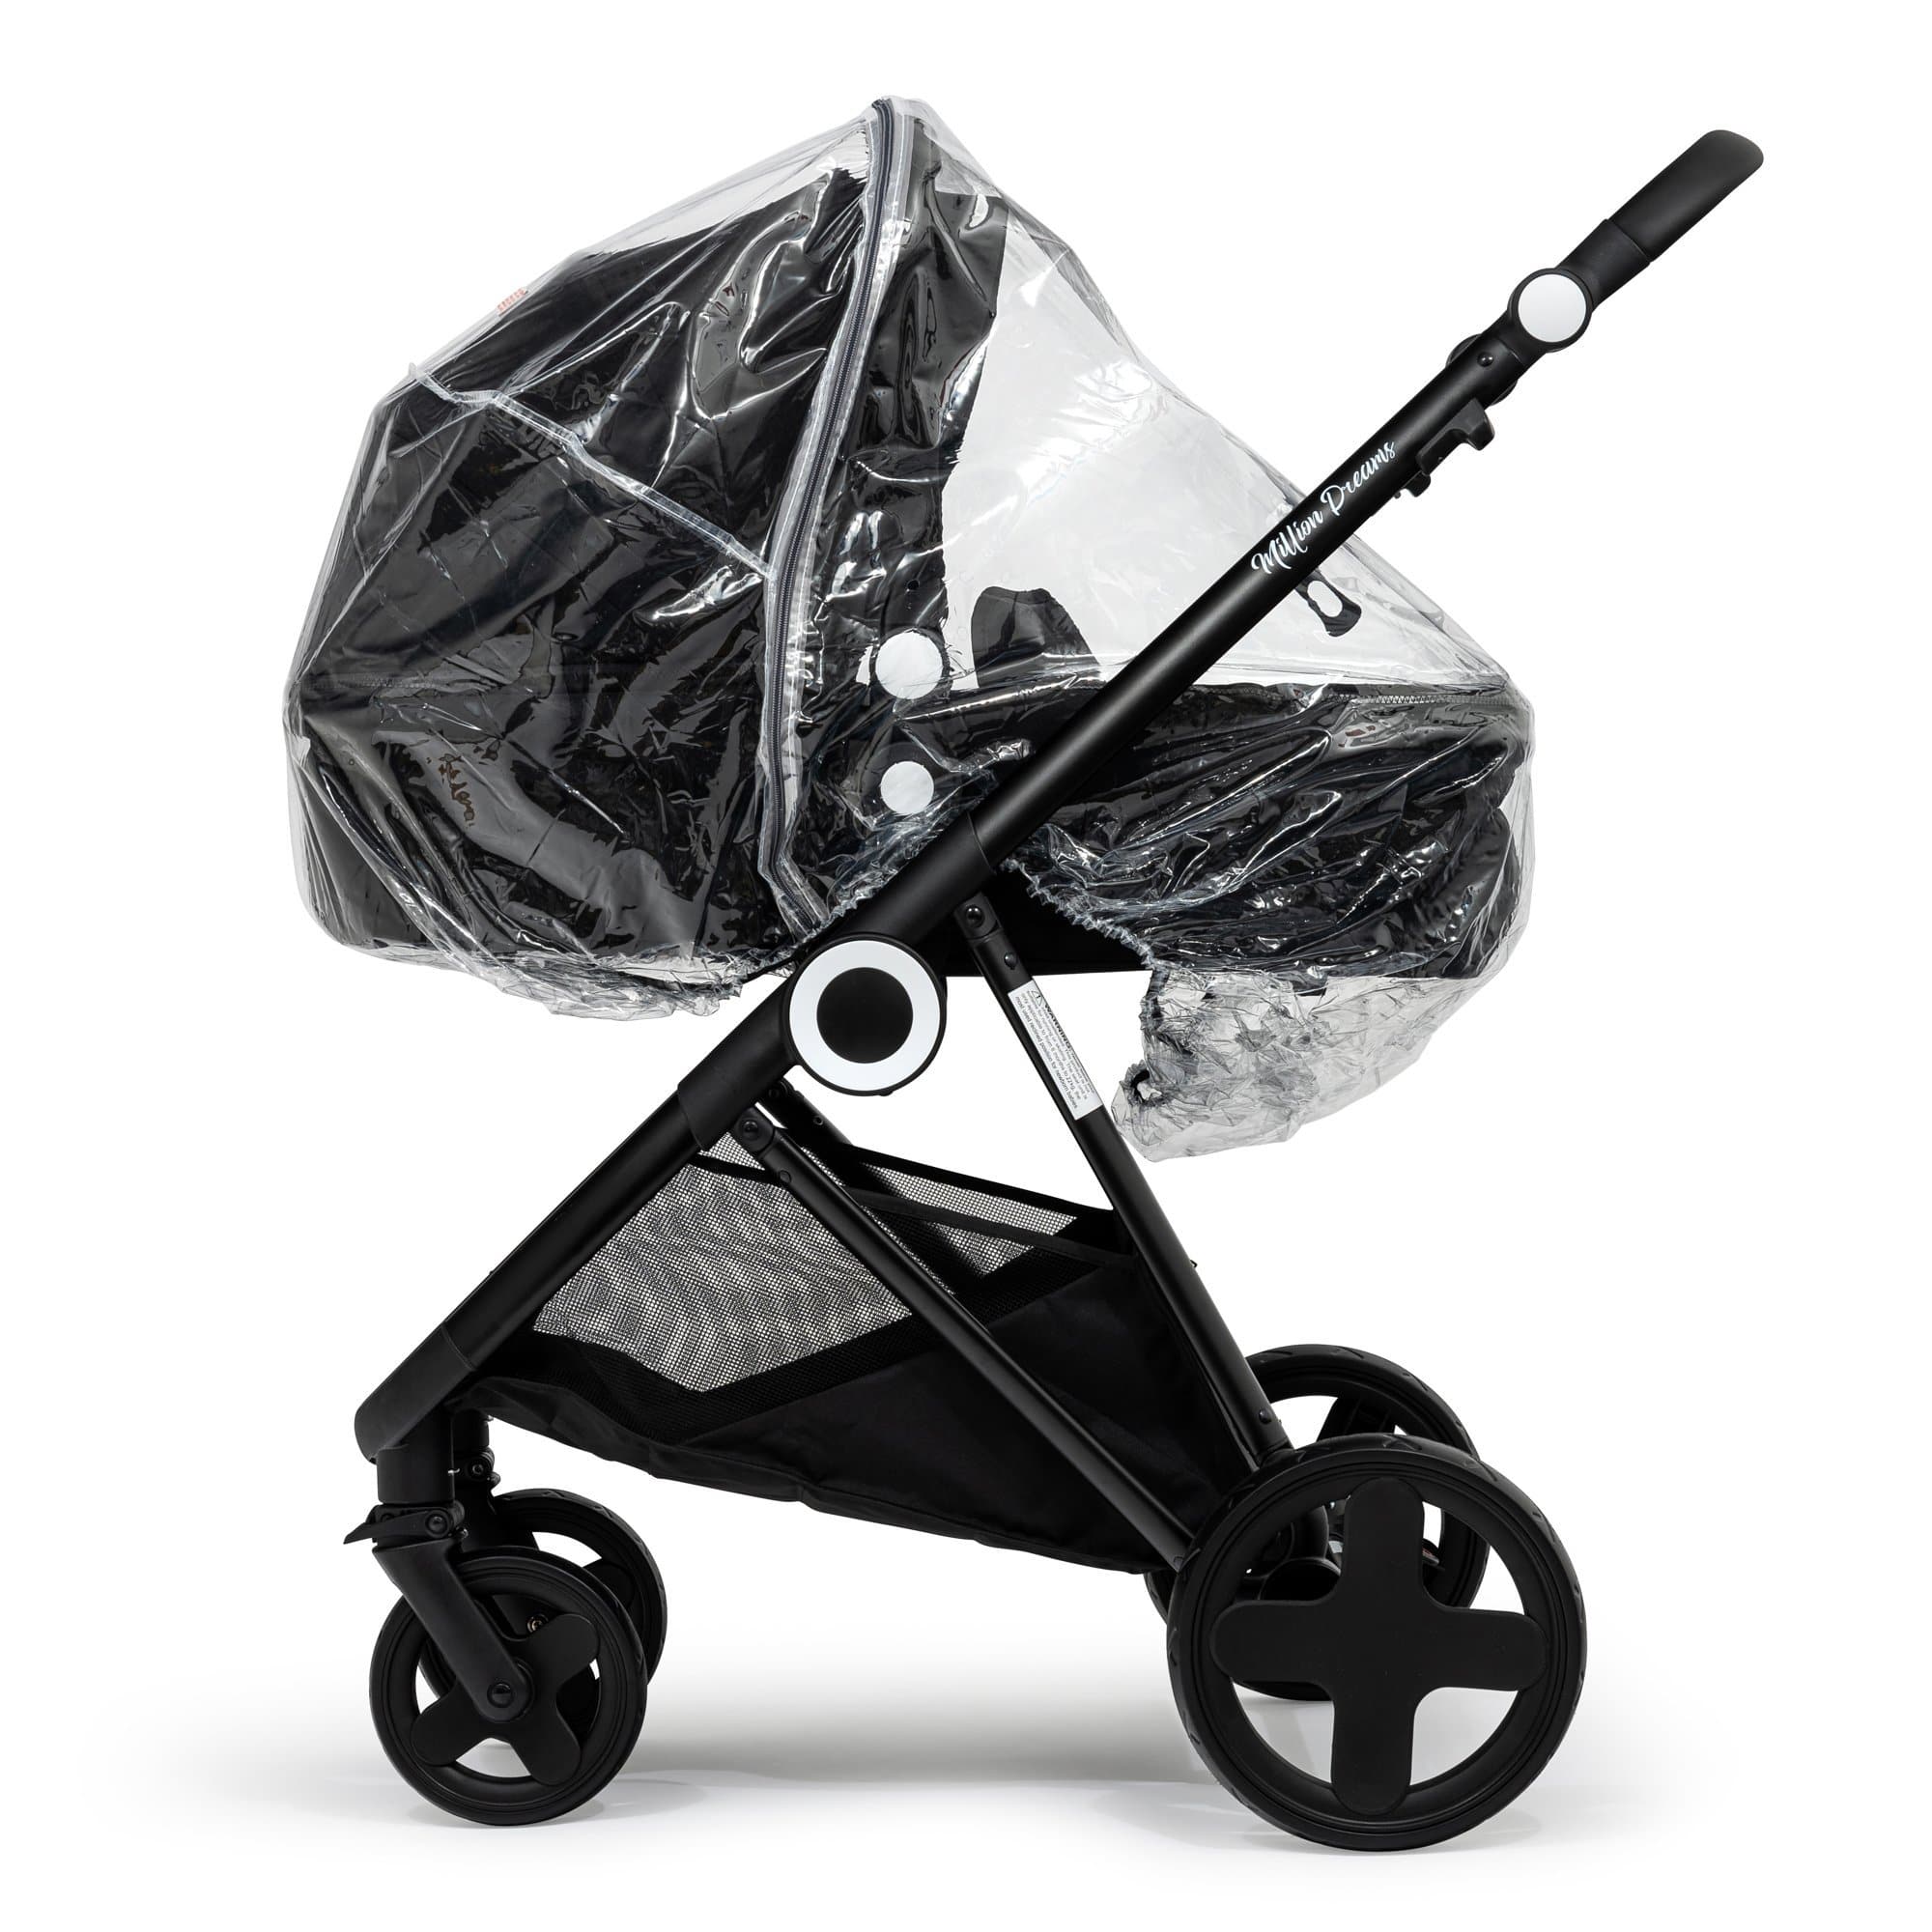 2 in 1 Rain Cover Compatible with Koelstra - Fits All Models - For Your Little One